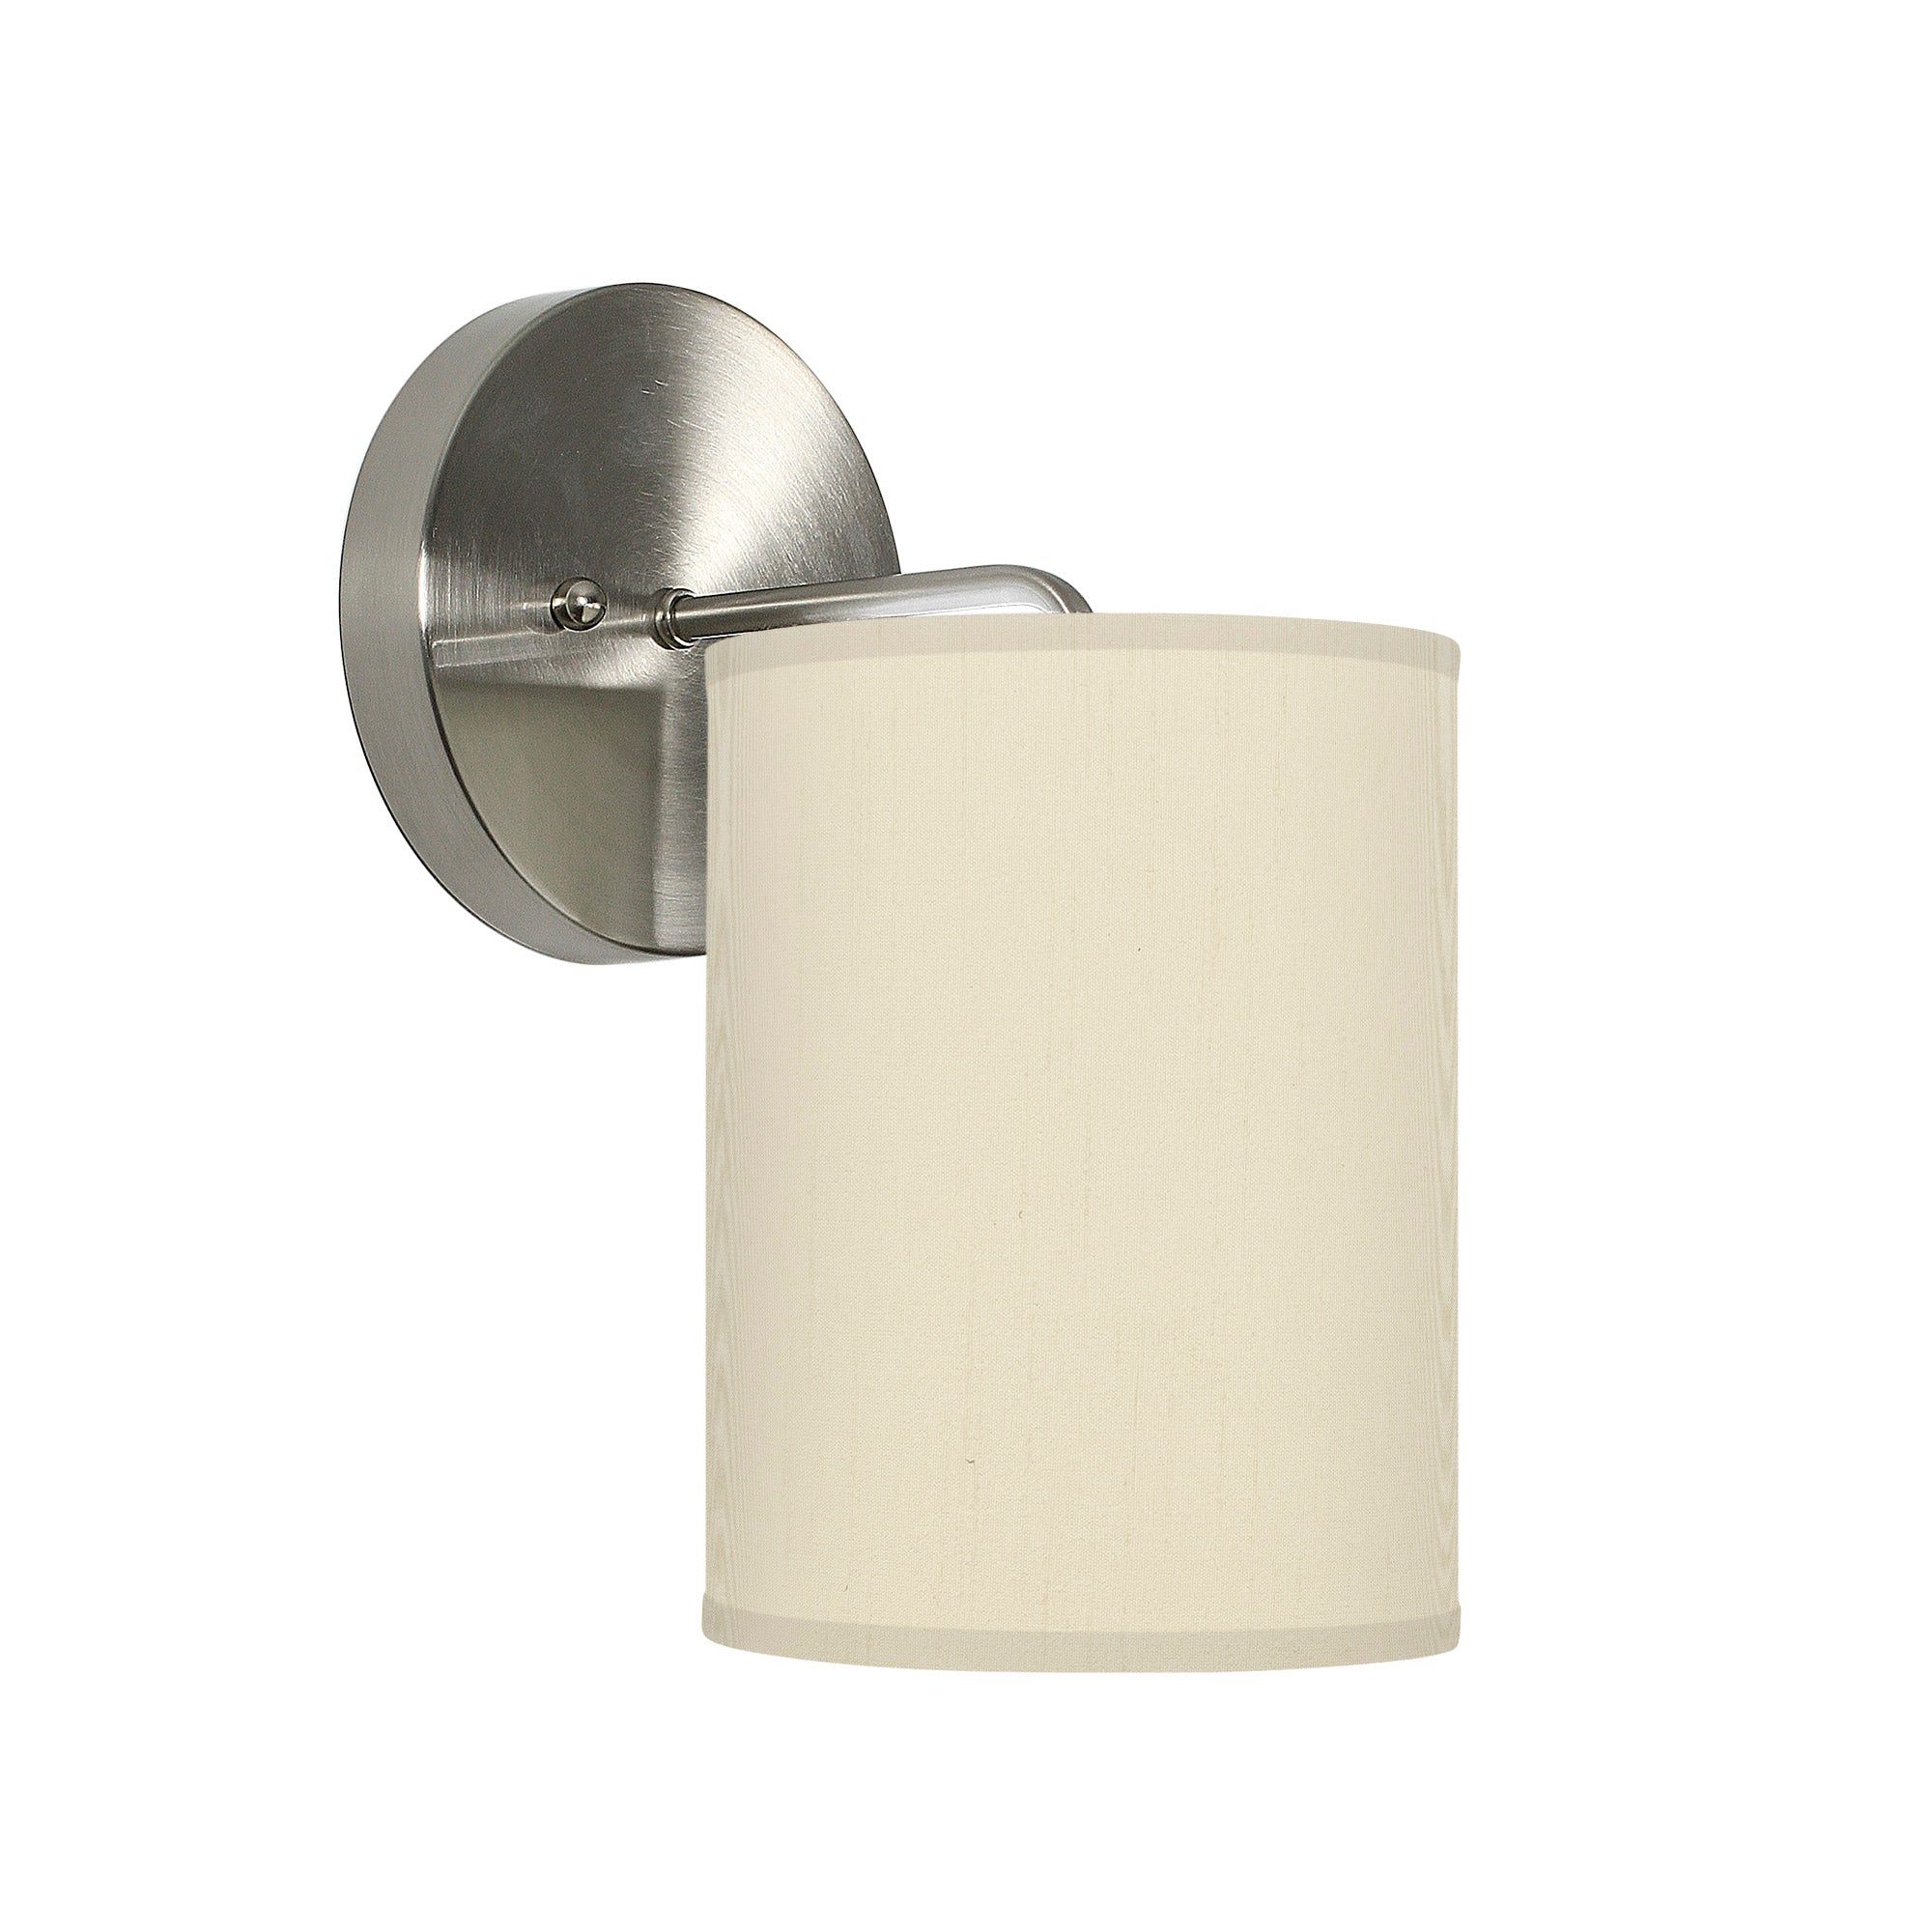 The Blair Wall Sconce from Seascape Fixtures in silk, cream color.